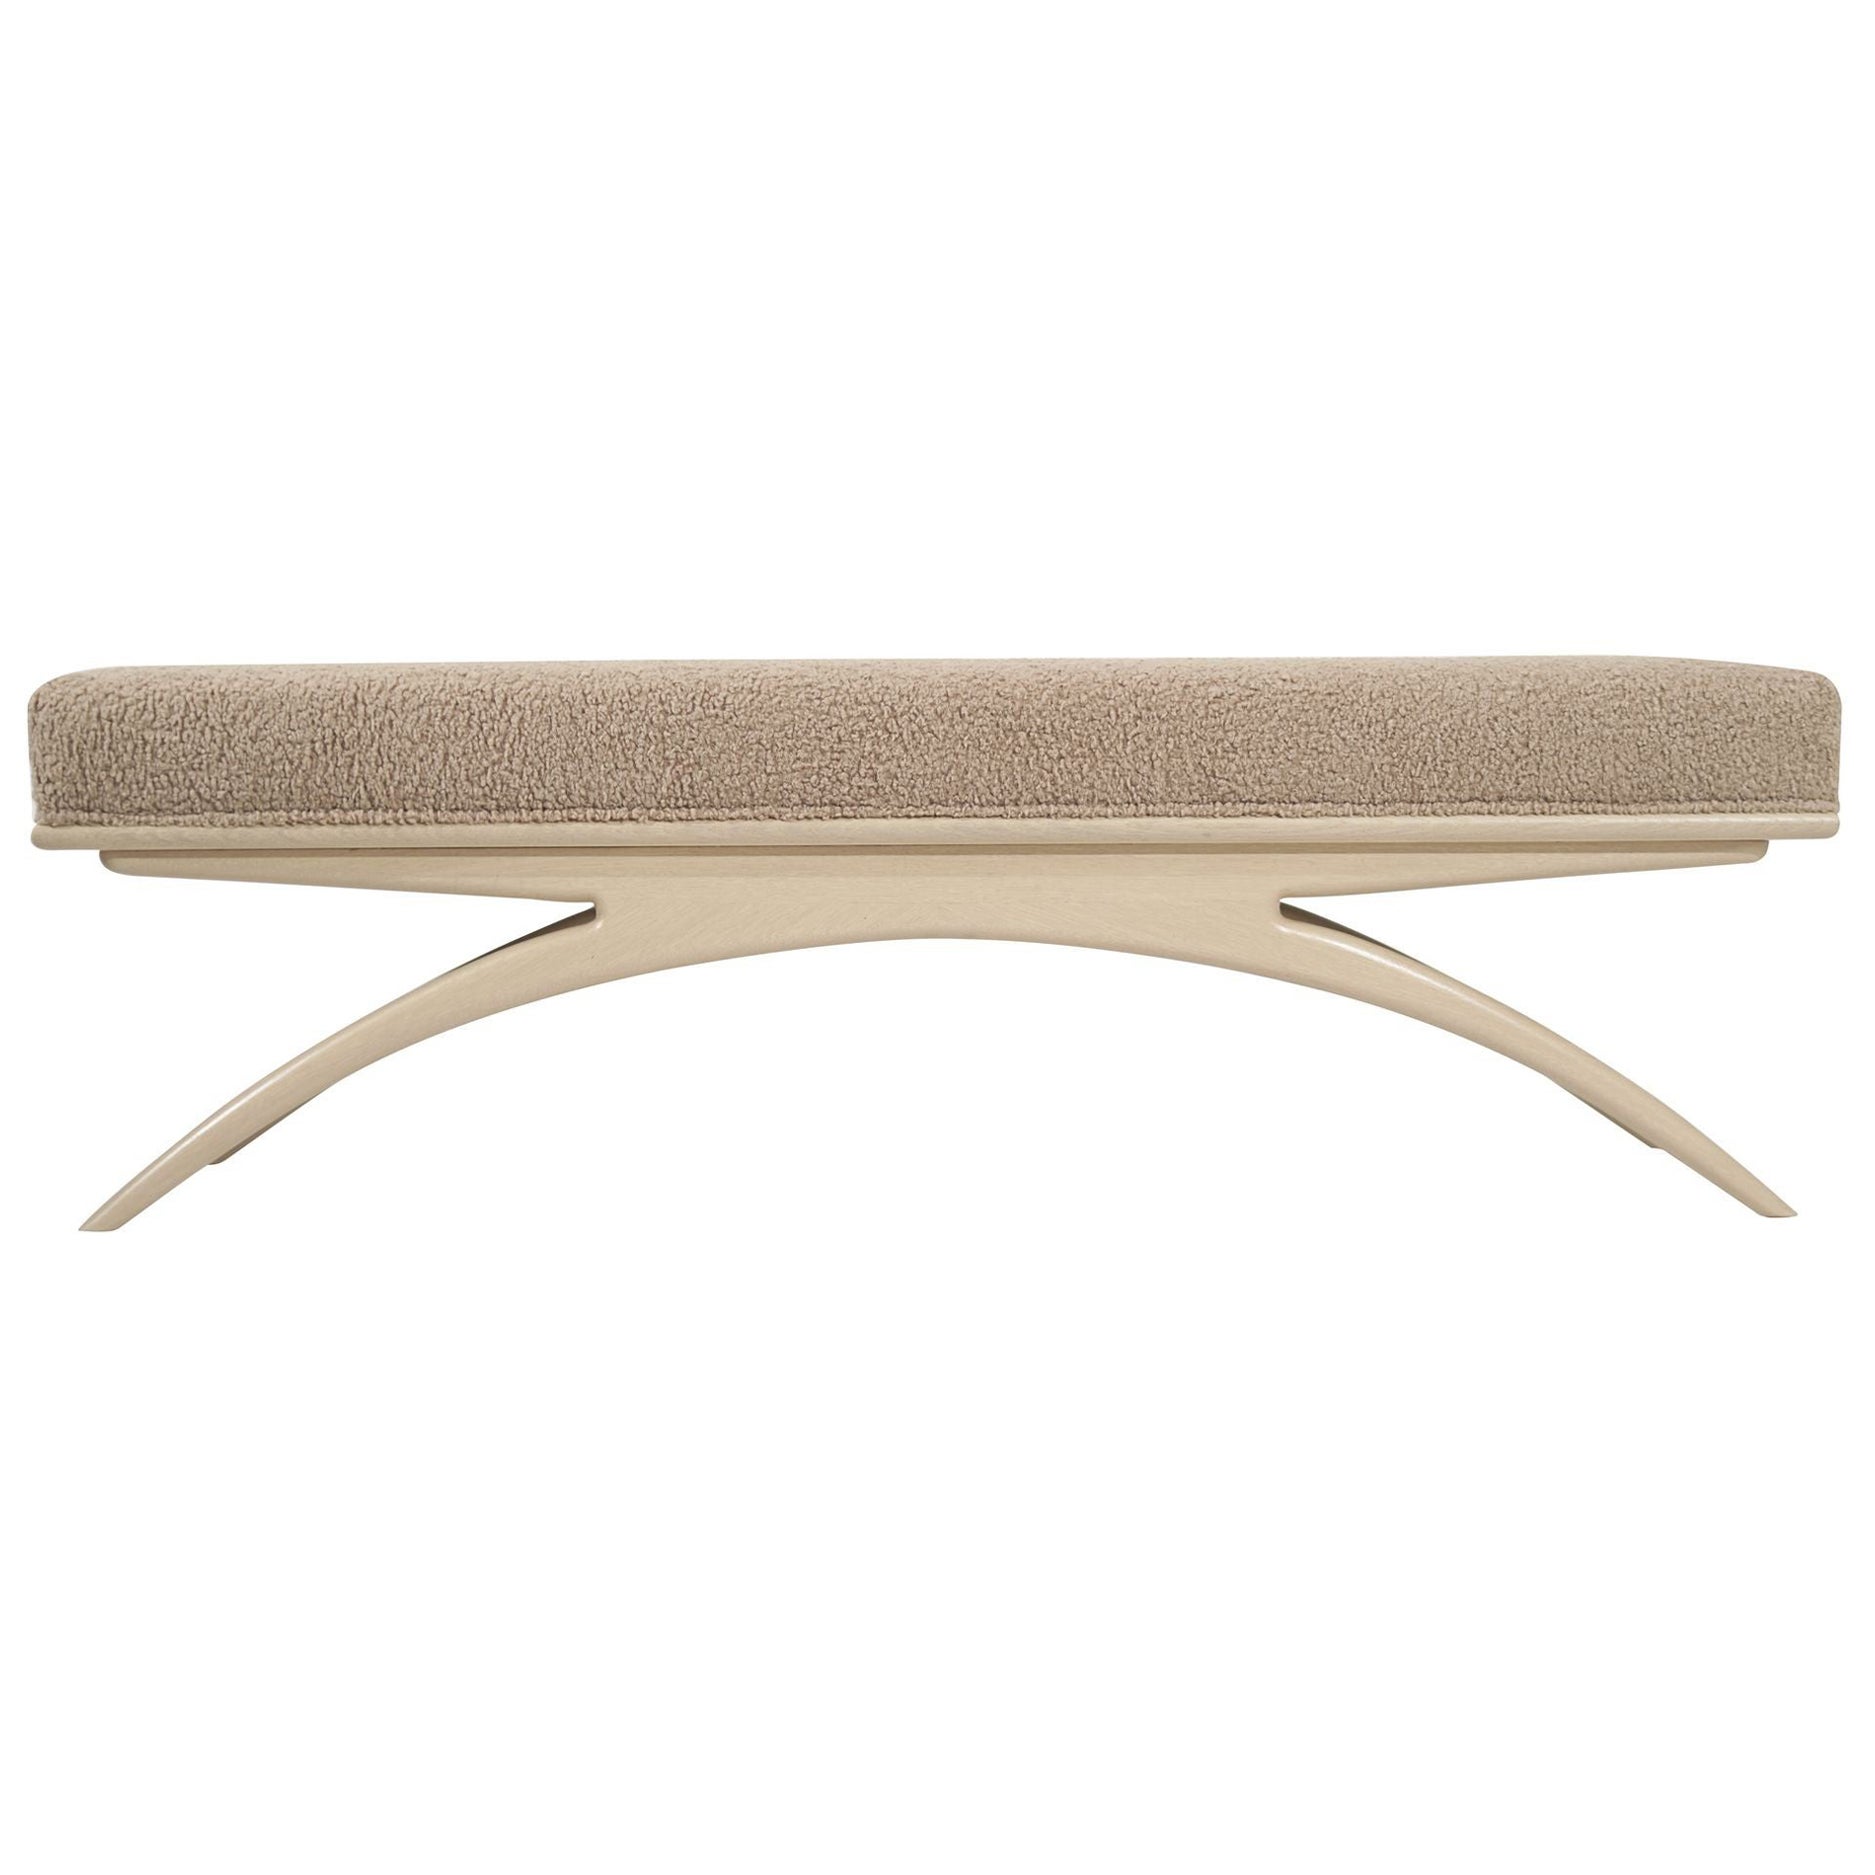 Convex Bench Series 60 in White Oak For Sale